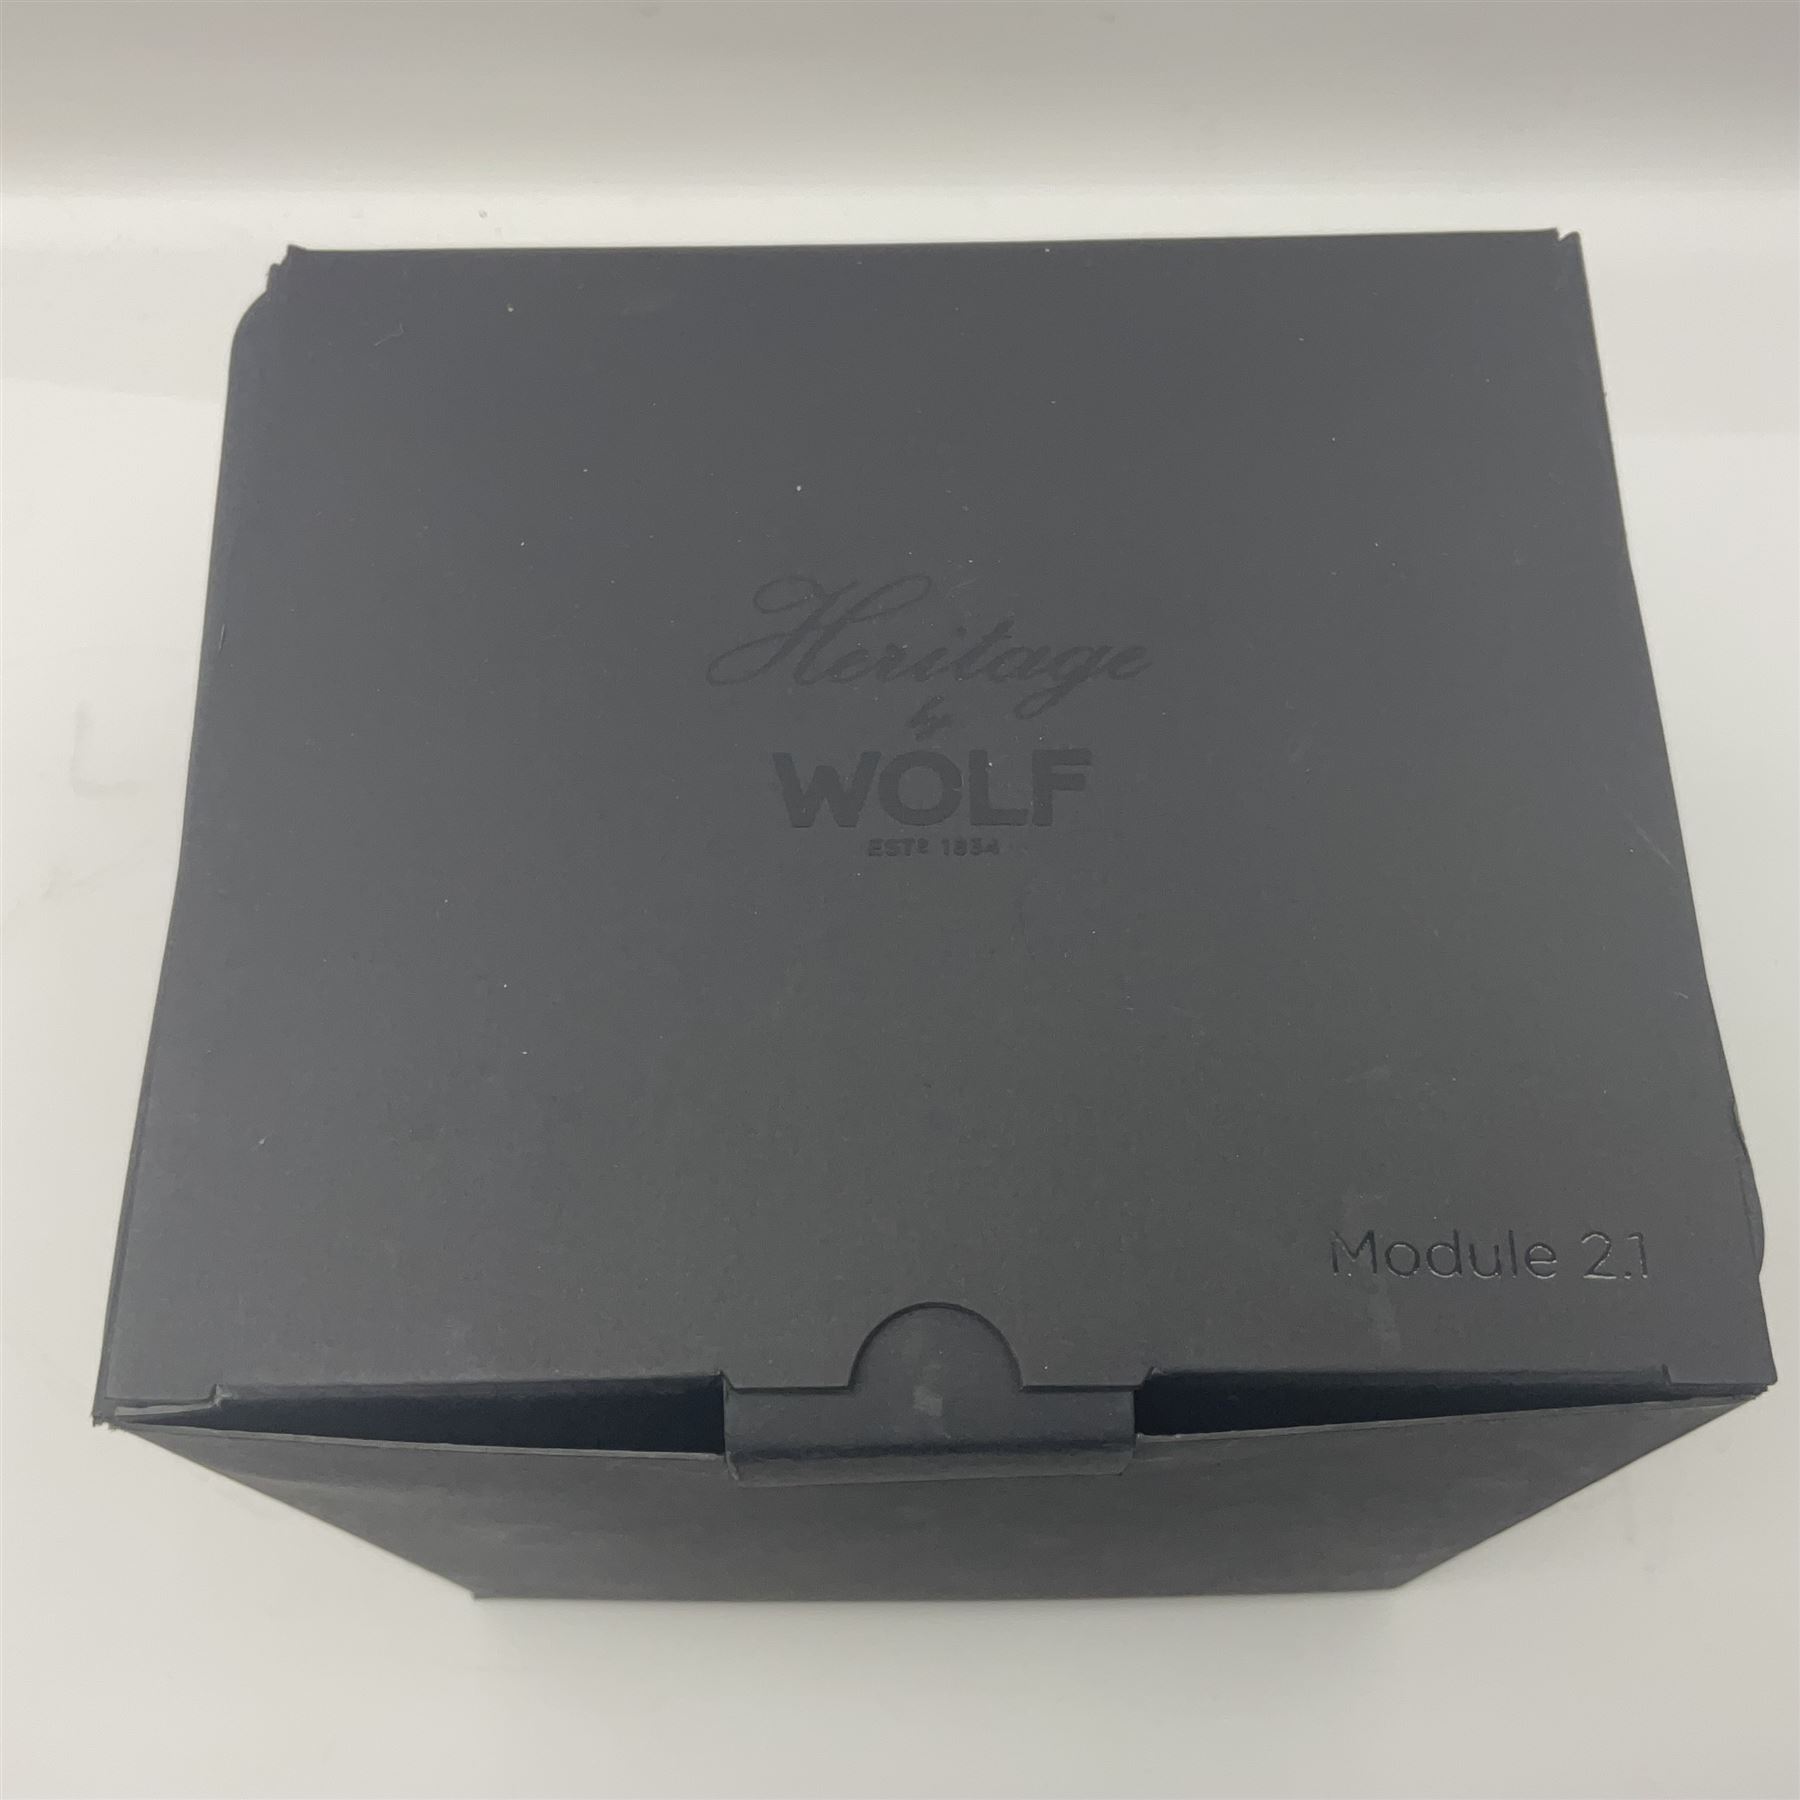 Heritage by Wolf Module 2.1 watch winder - Image 14 of 14